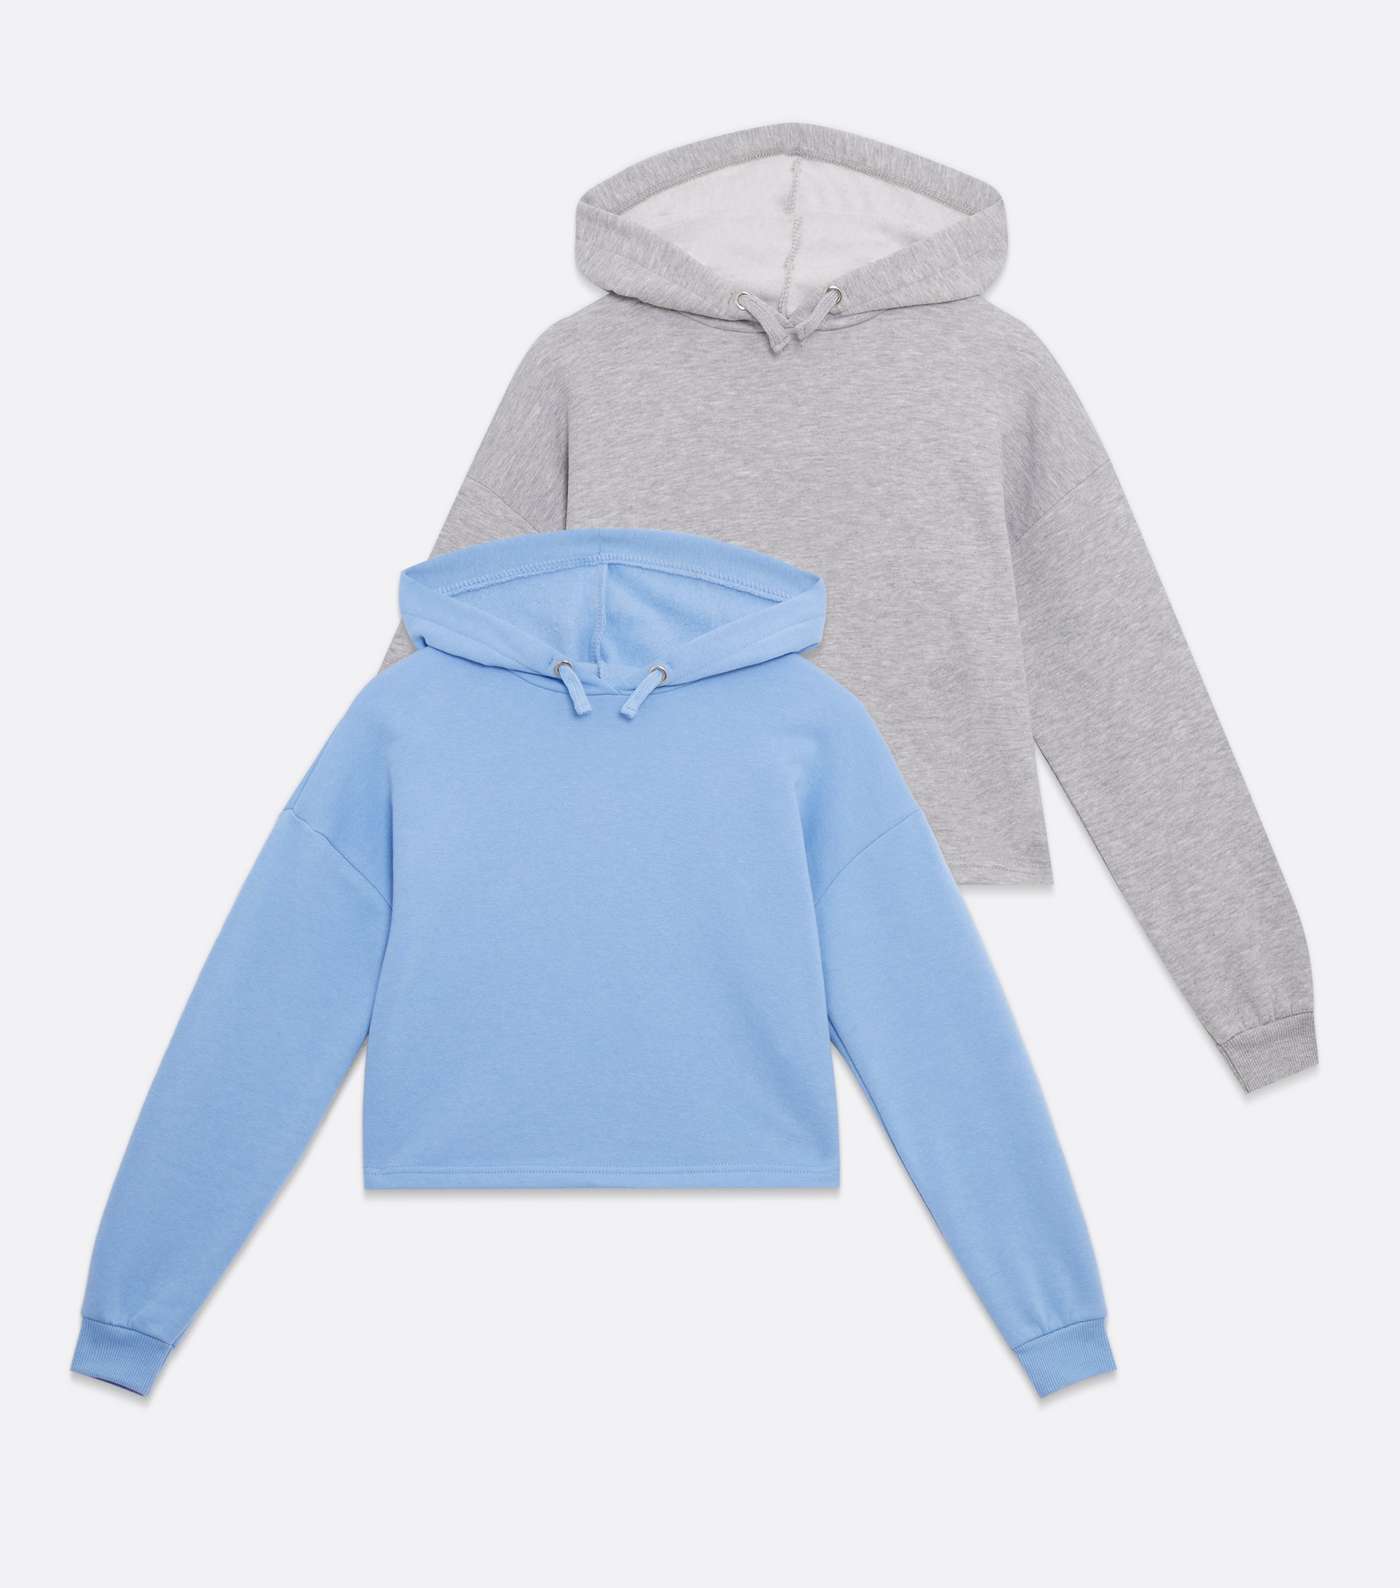 Girls 2 Pack Pale Blue and Grey Plain Hoodies Image 5